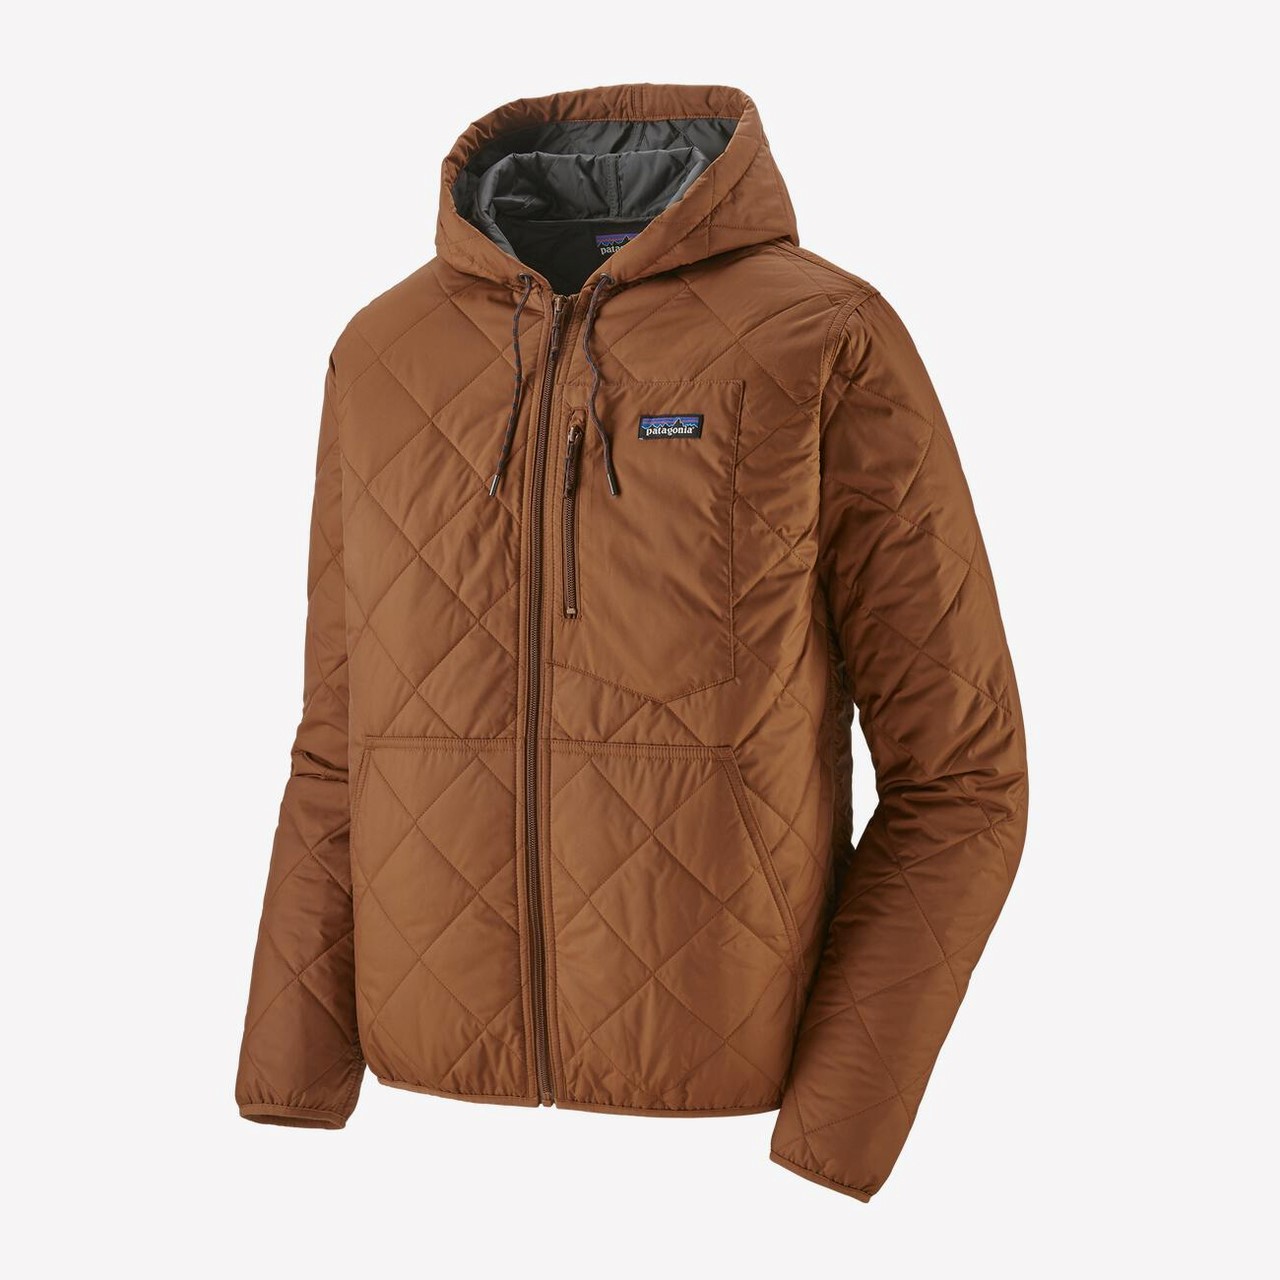 Patagonia M's Diamond Quilted Bomber Hoody - Earthworm Brown - Medium